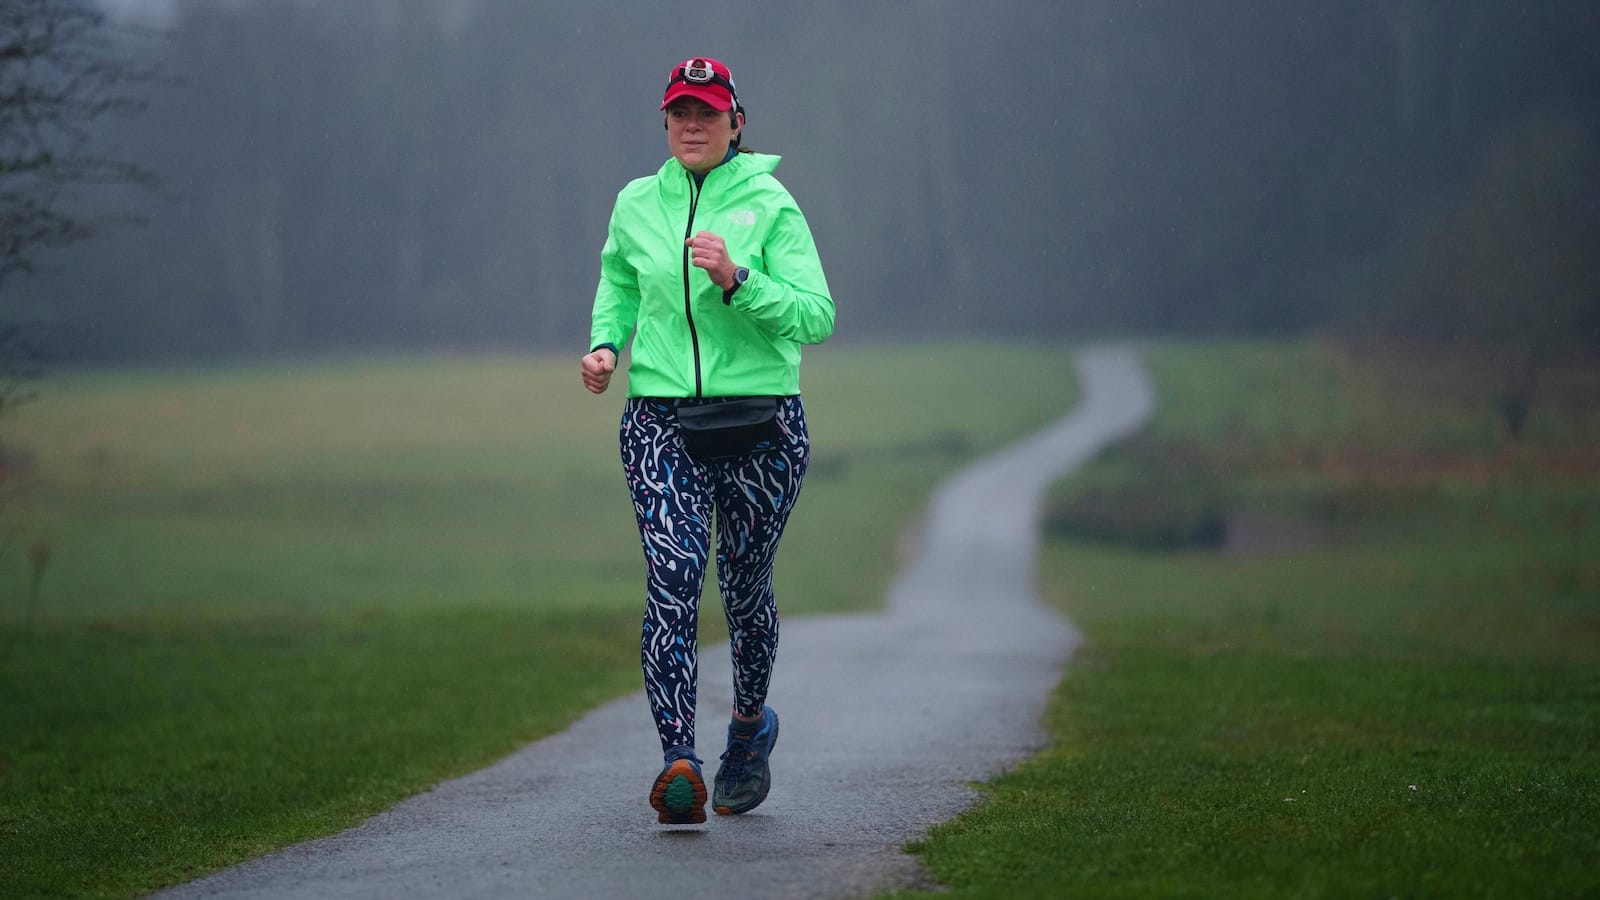 Mother-of-three uses early-morning routine to become a record-breaking runner and inspiration